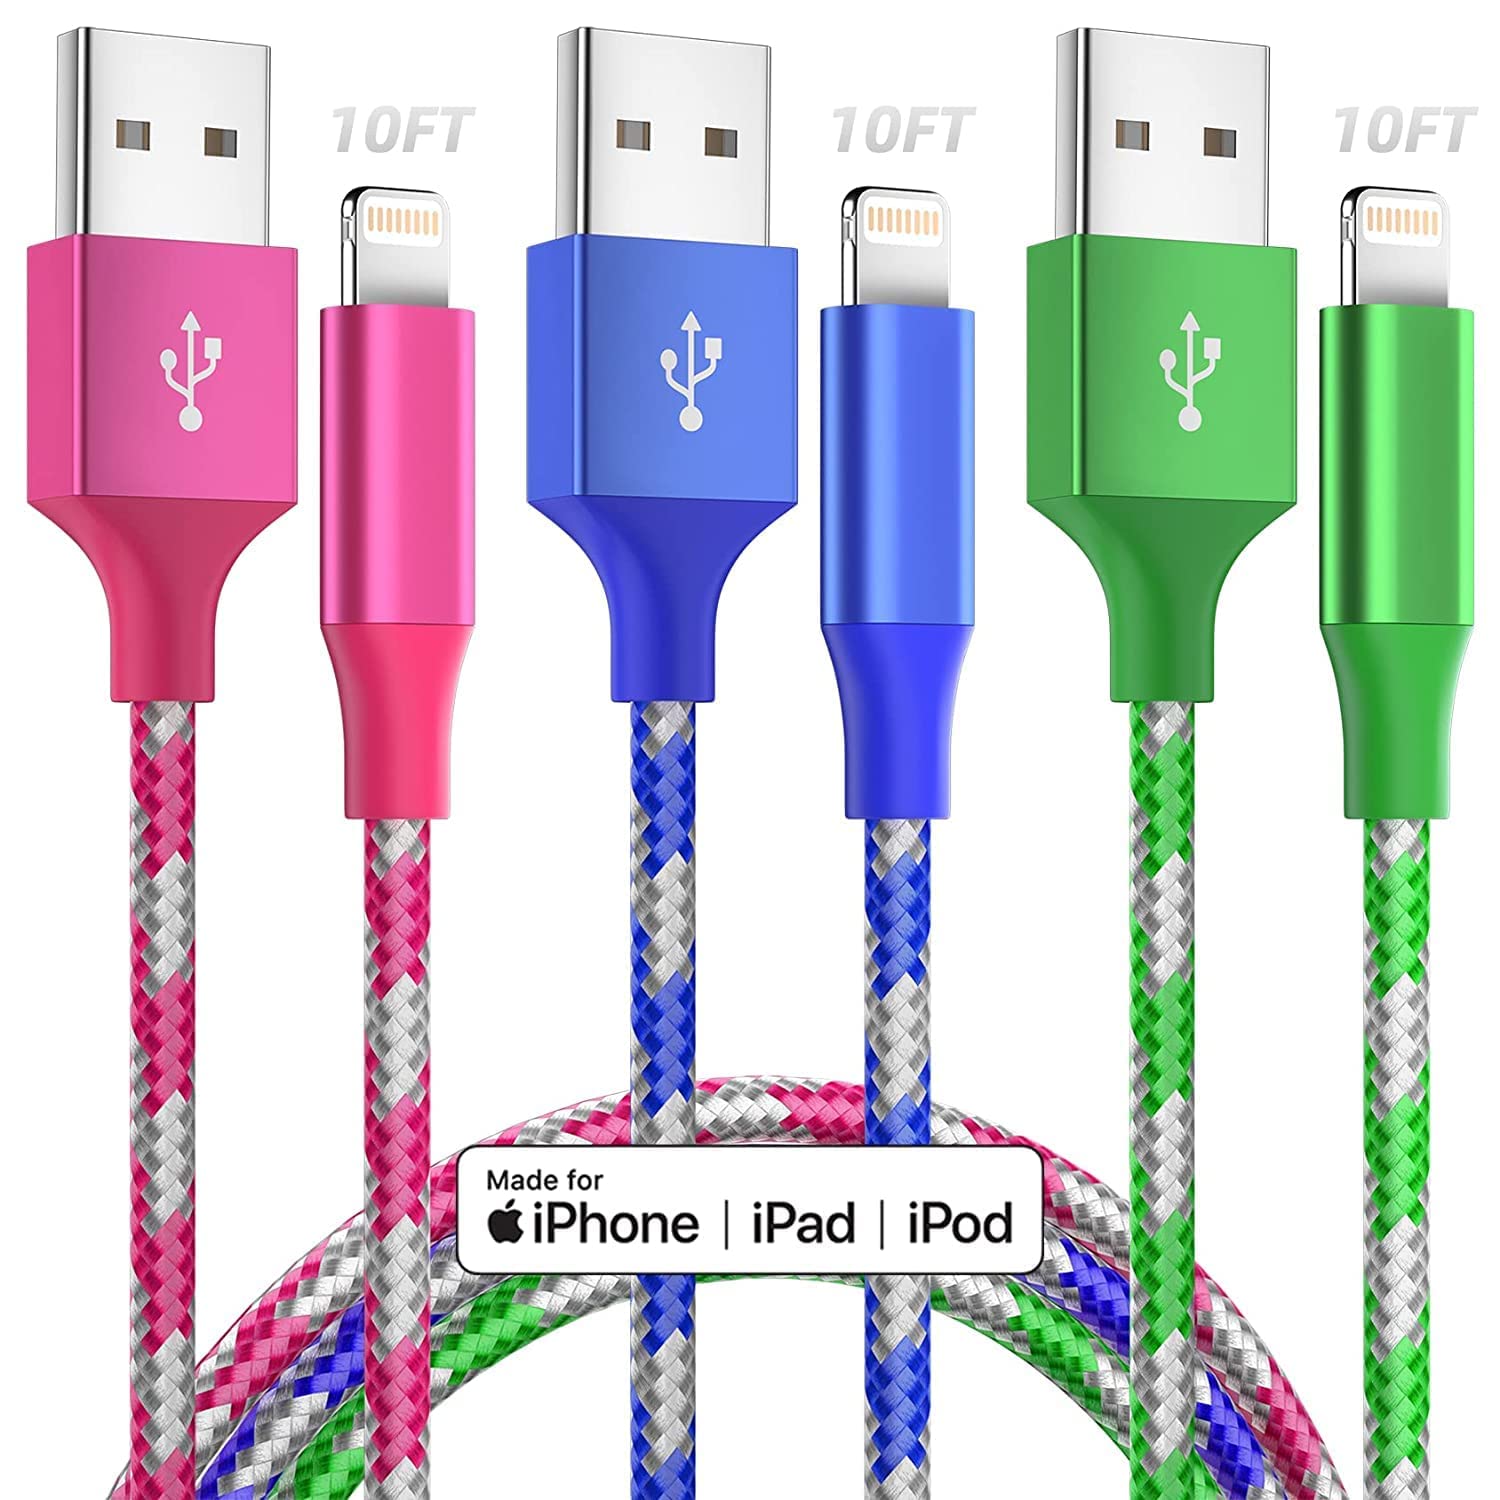 MenoSupp iPhone Charger Fast Charging Cable 3 Pack 10 FT MFI Certified Lightning Cable Nylon Braided iPhone Charger Cord Compatible with iPhone 13 12 11 Pro Max XR XS X 8 7 6 Plus SE and More